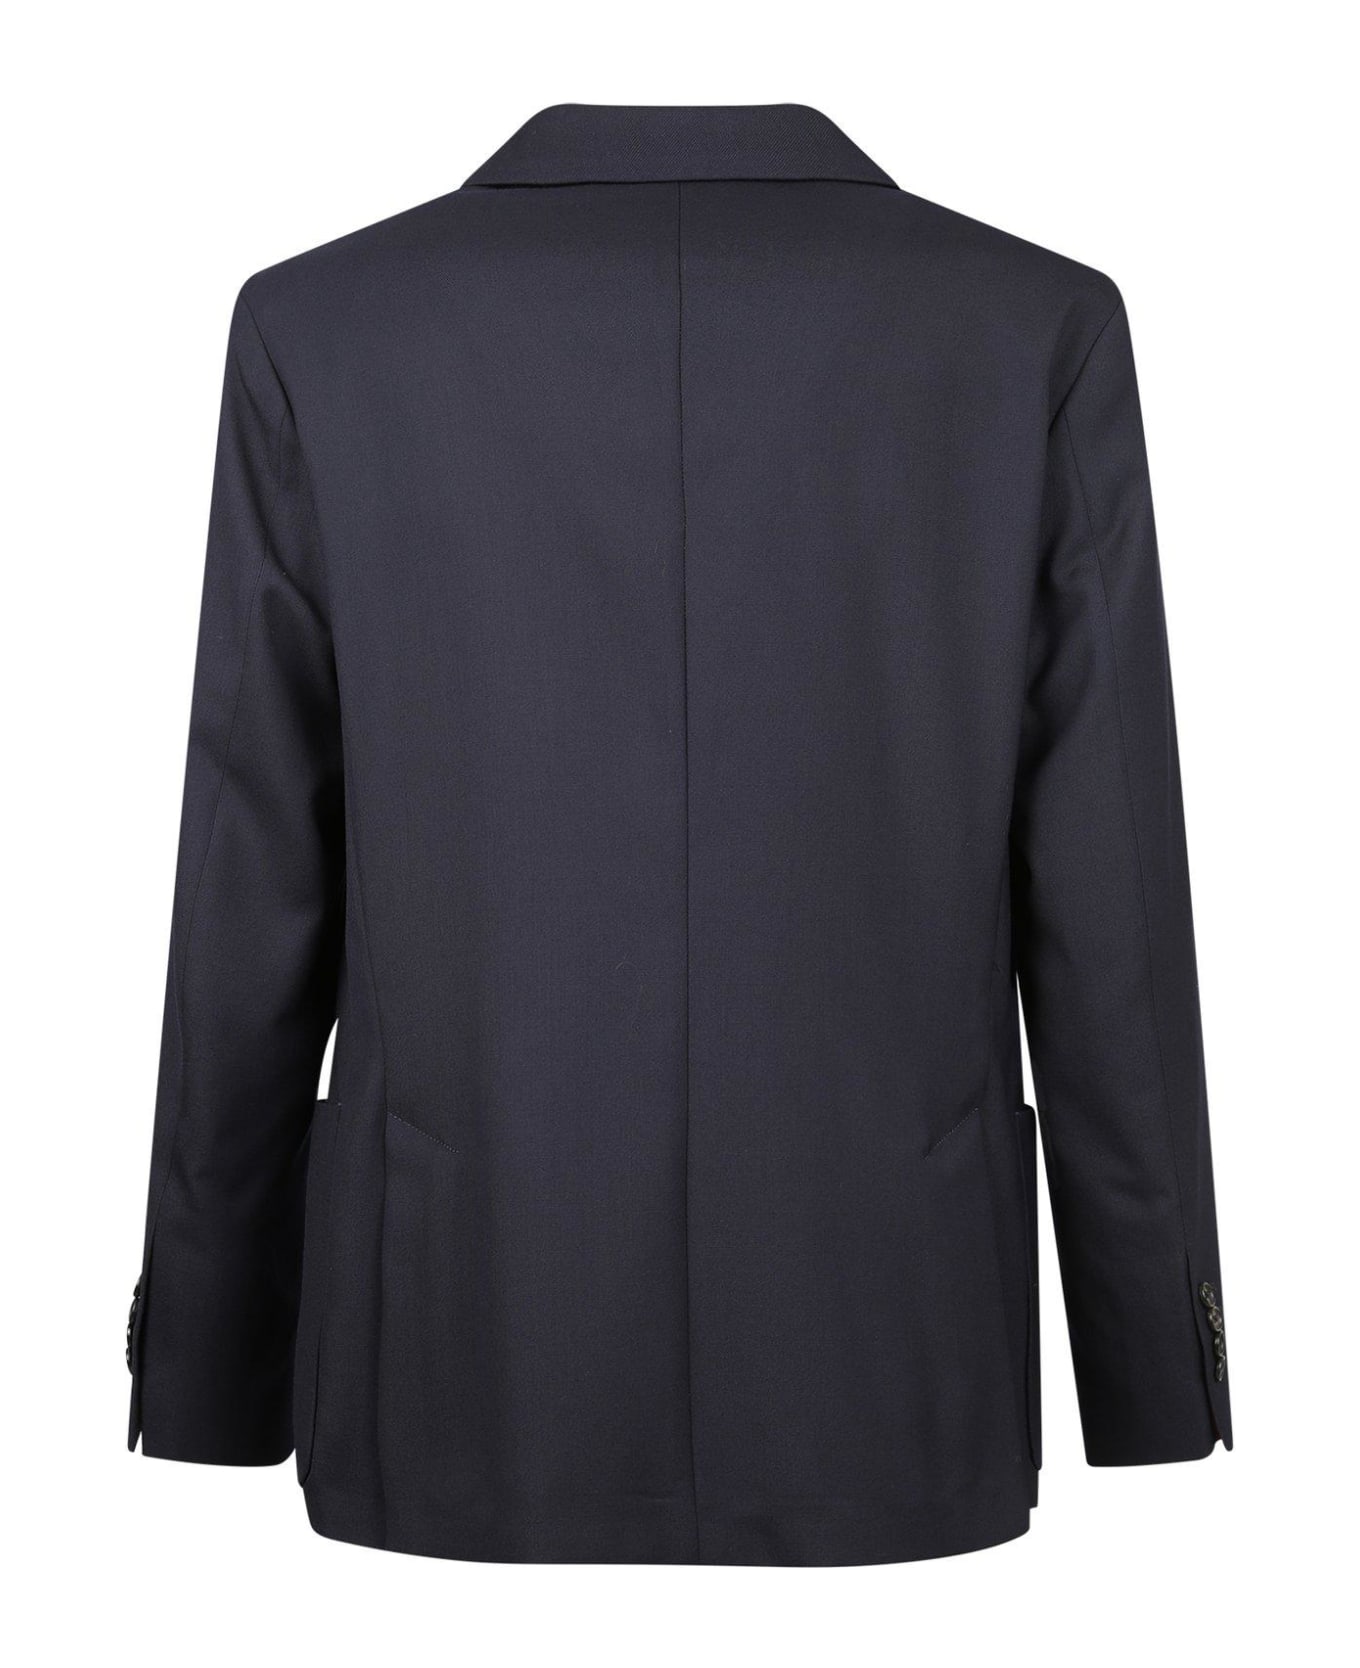 PS by Paul Smith A Suit To Travel In Unlined Blazer Blazer - DARK NAVY ブレザー